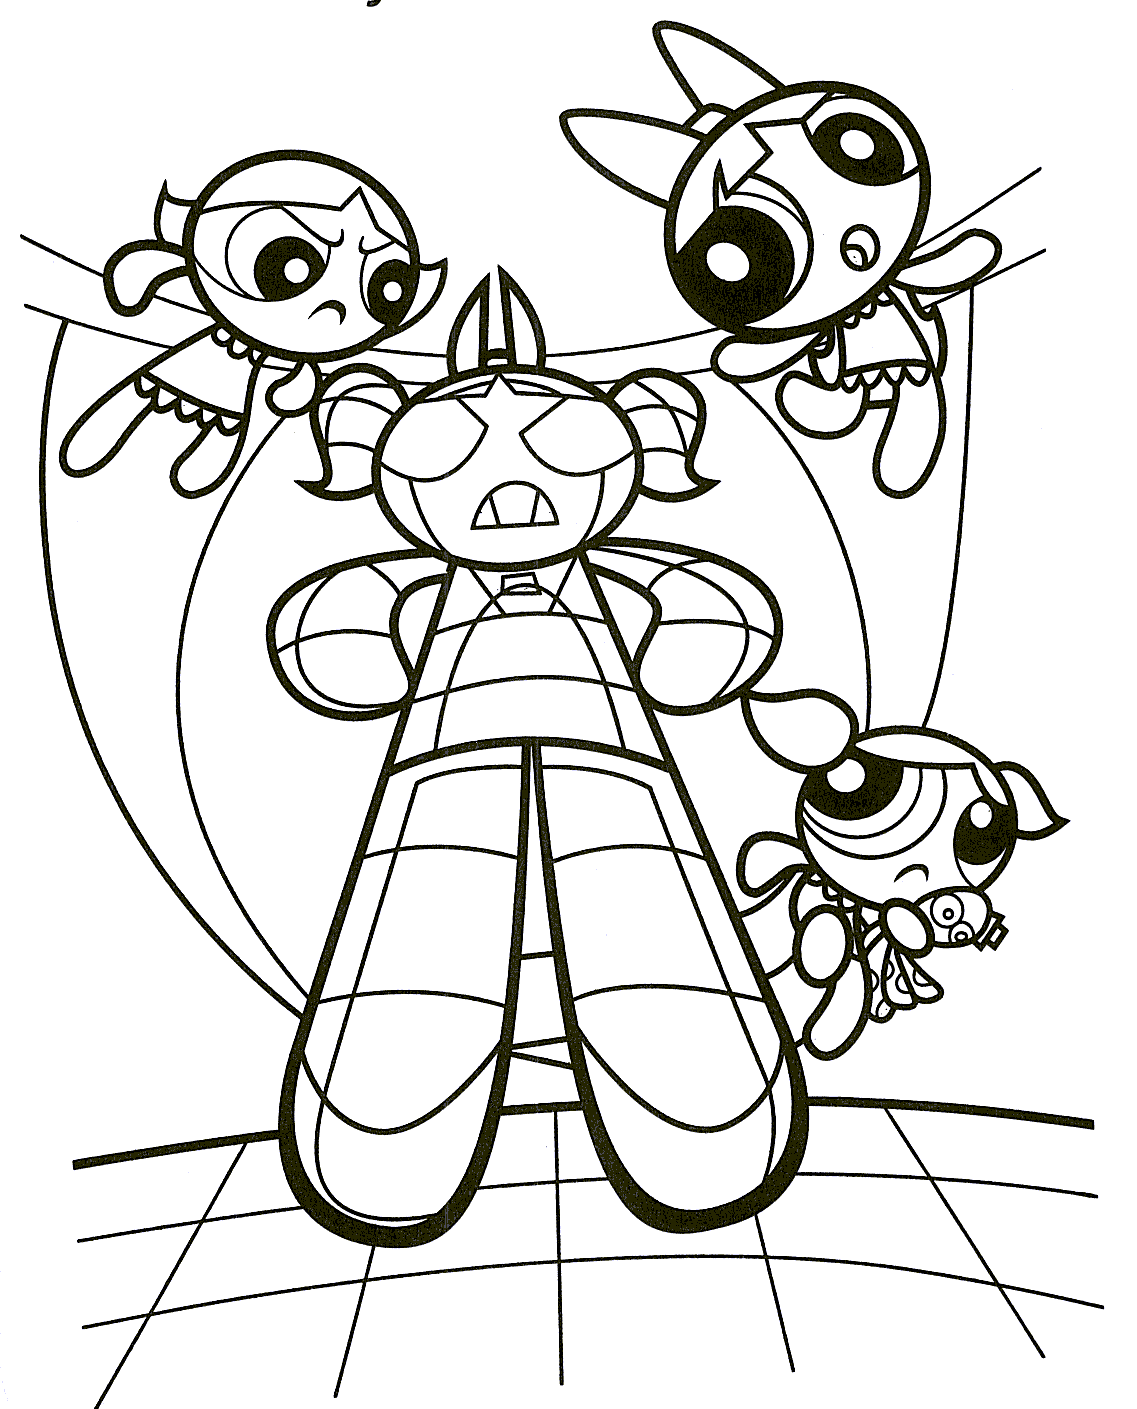 Powder Puff Girls Coloring Pages Coloring Pages 2019 - power puff girls z coloring pages 6 roblox